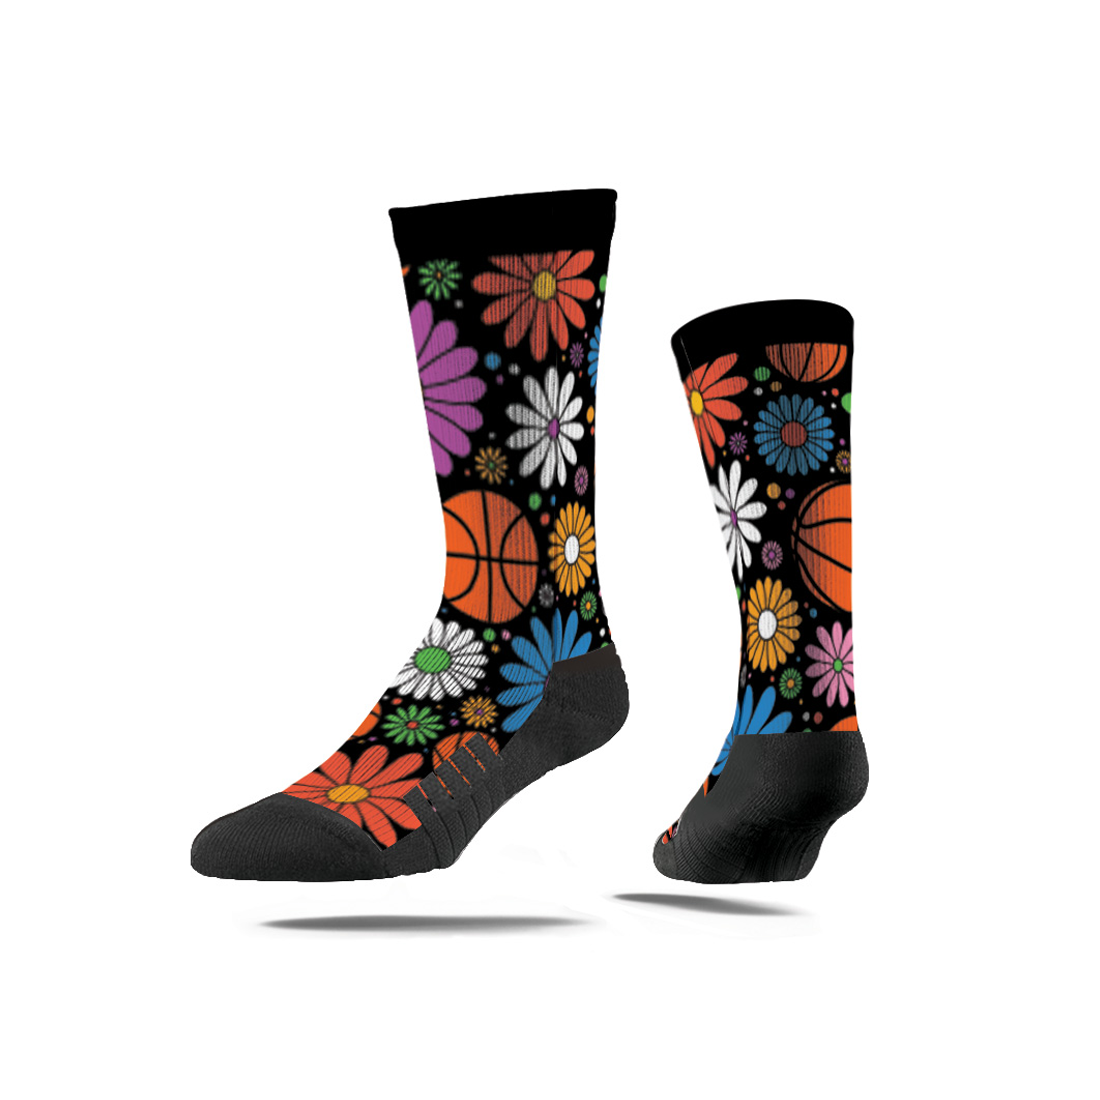 Variety 2 Pack - White and Black Basketball Daisy Socks - Buy 2 and Save!